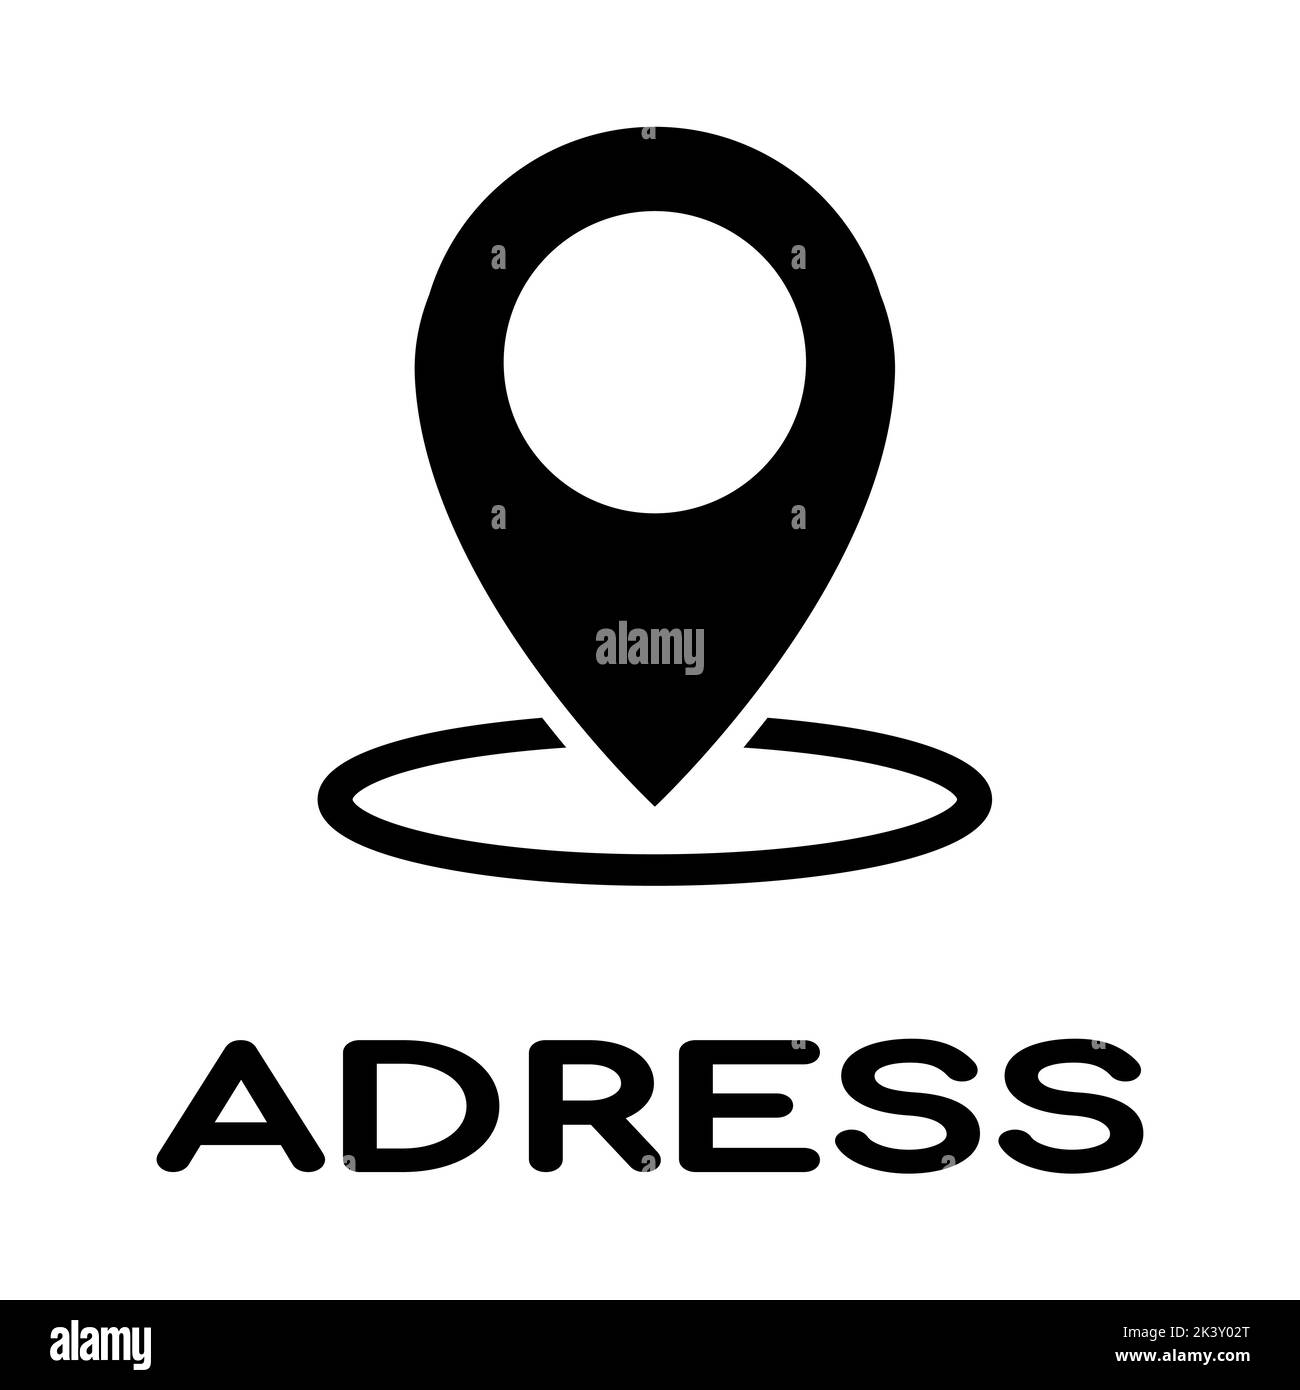 Location or adress icon in flat style. Pin sign Isolated on white. Navigation map symbol. Simple abstract place icon in black. Vector illustration Stock Vector